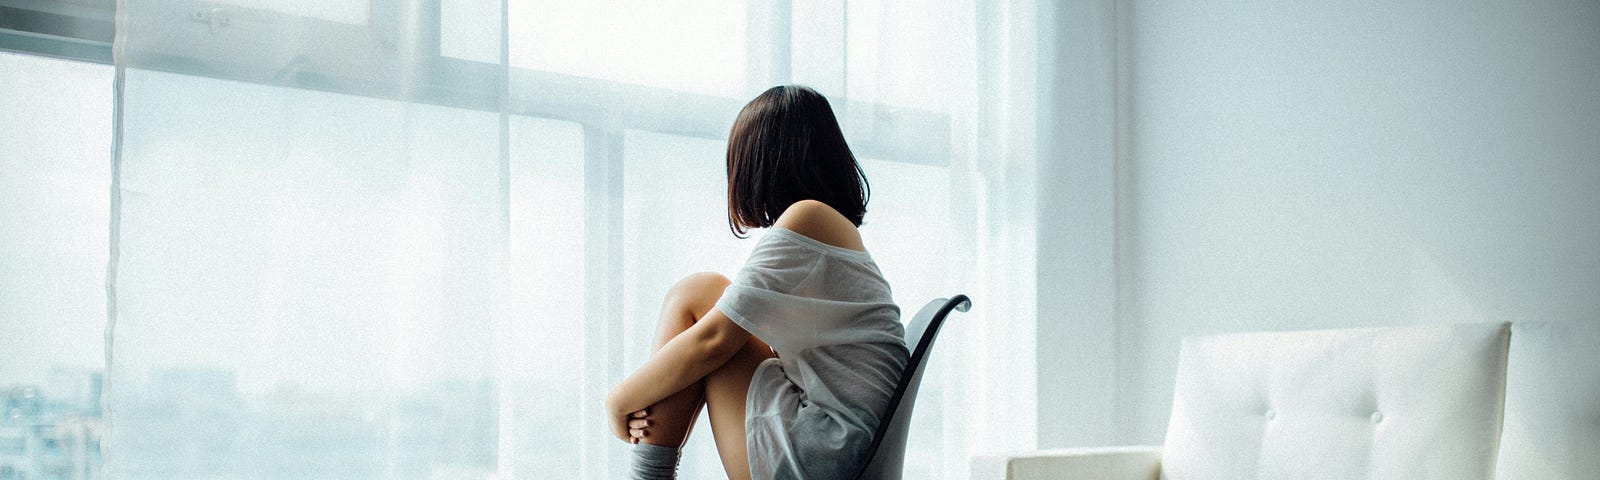 A woman sits on a chair, hugging her knees, staring out the window.